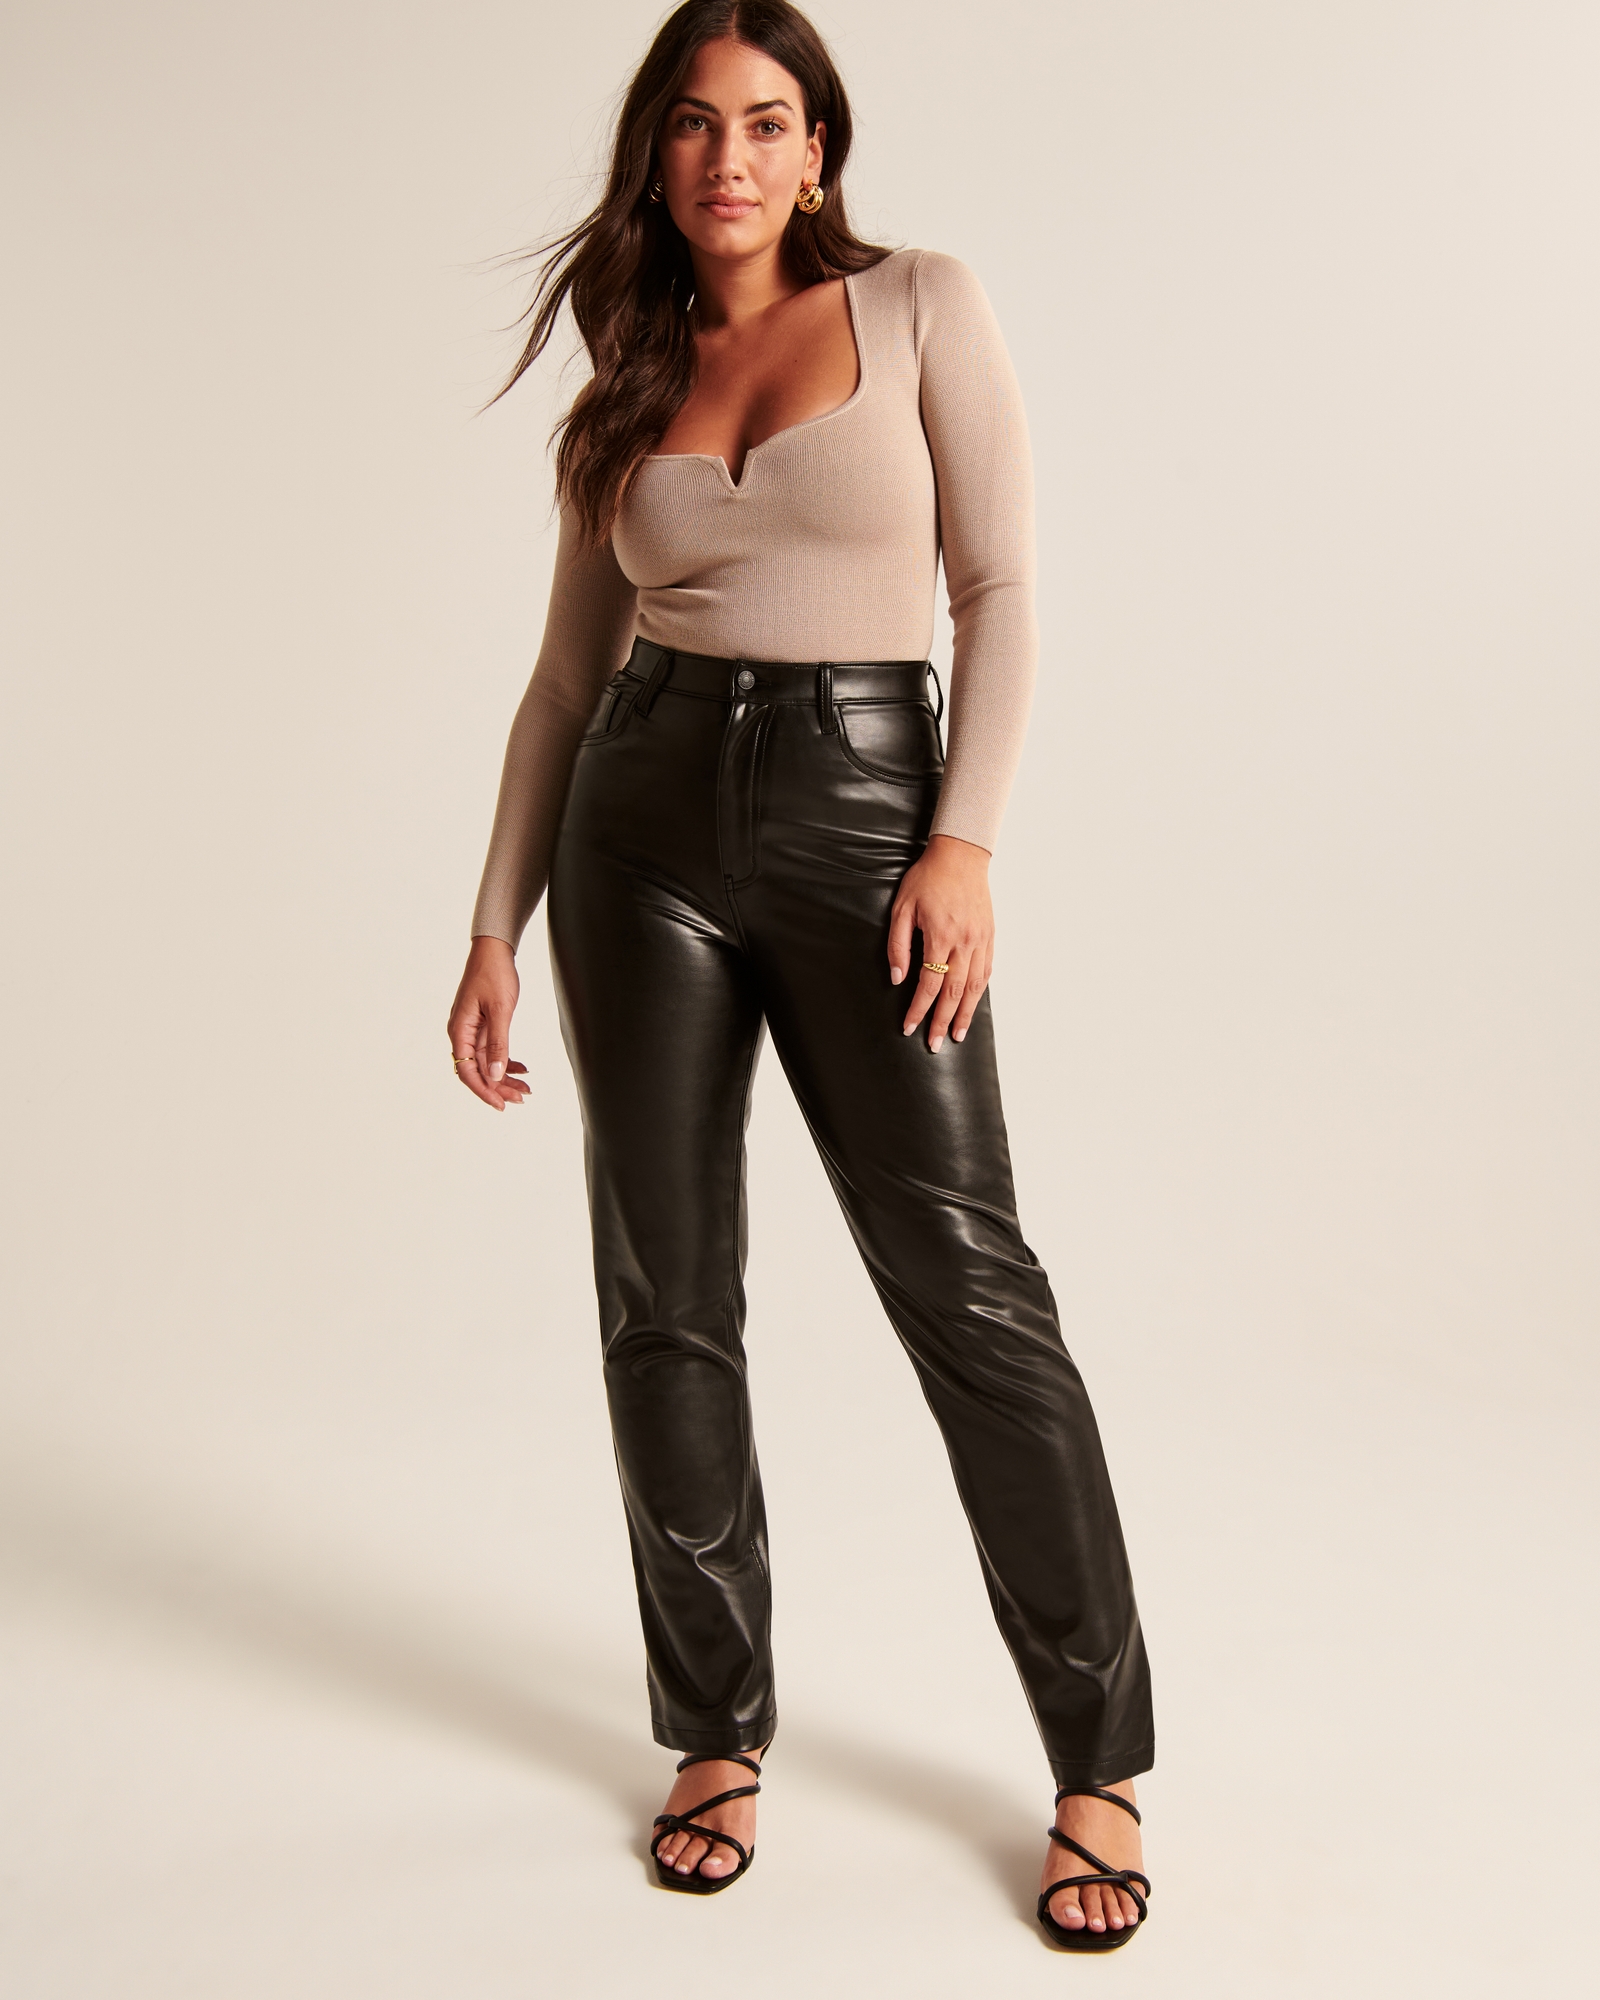 Glam Girl Leather Pants